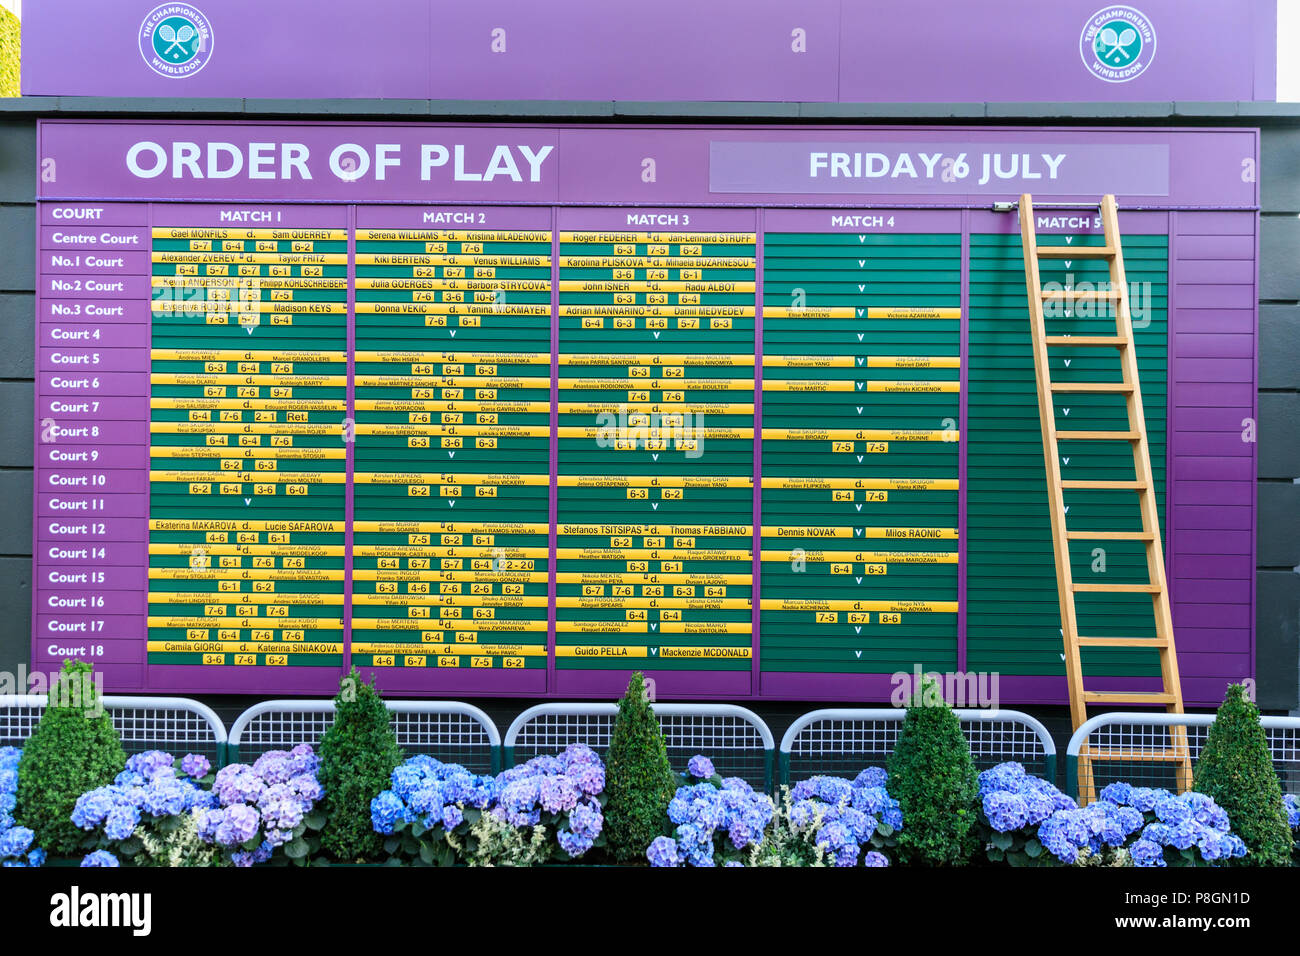 The order of play on the day information board with listings for players and matches at the Wimbledon Championships, UK Stock Photo